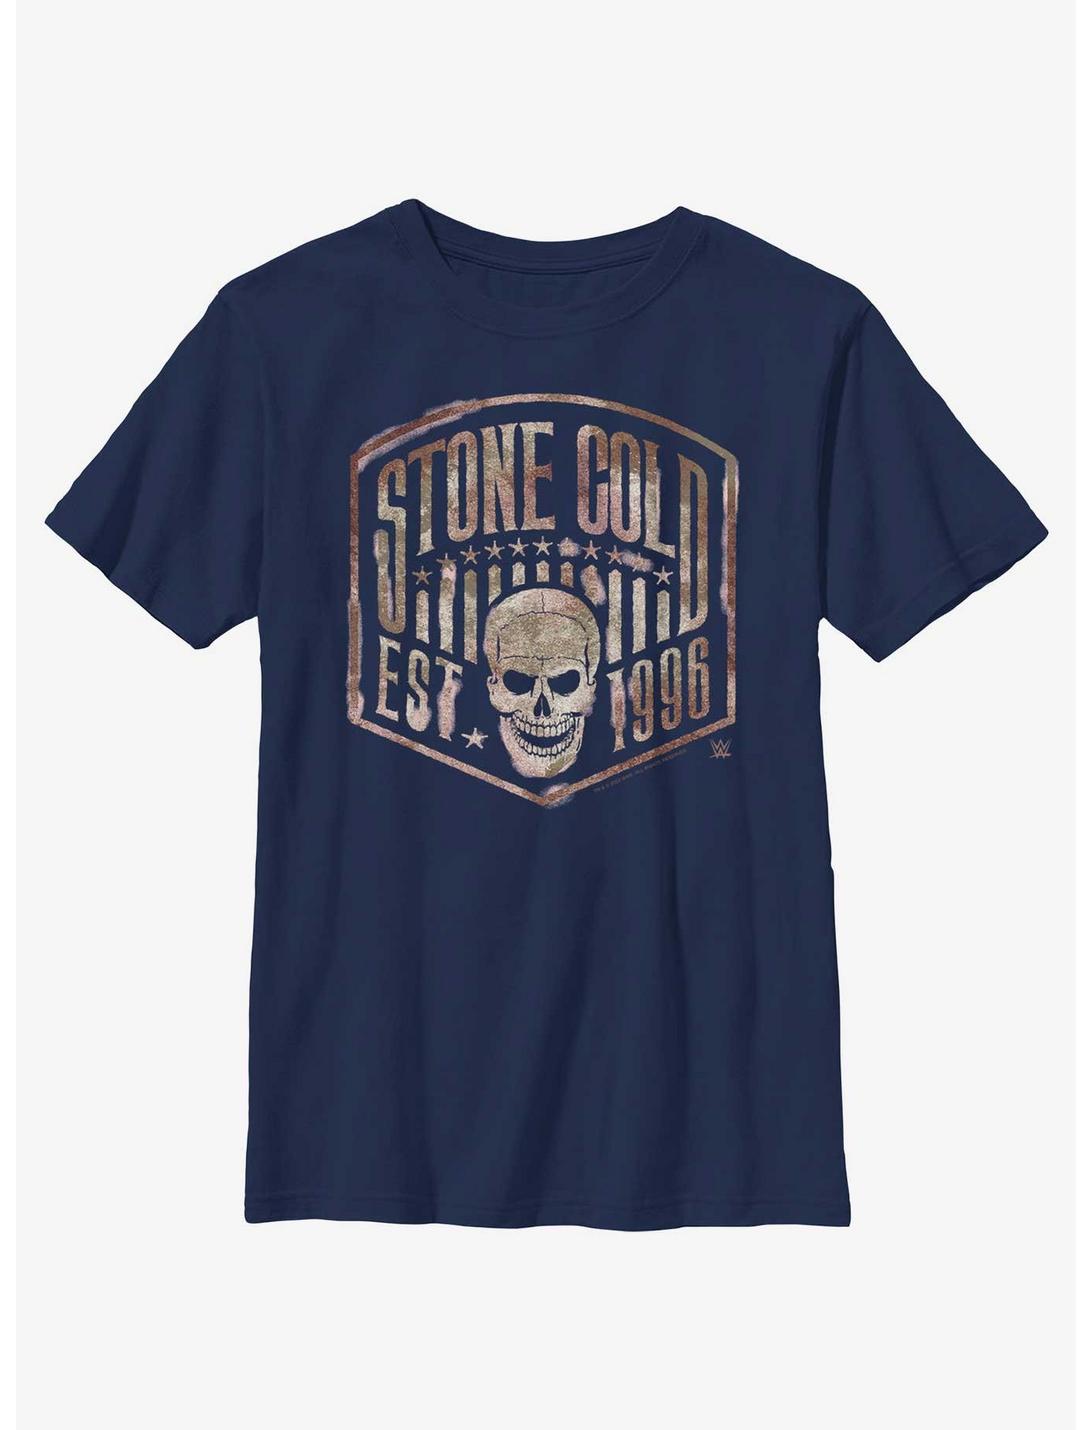 WWE Stone Cold Skull Crest Youth T-Shirt, NAVY, hi-res